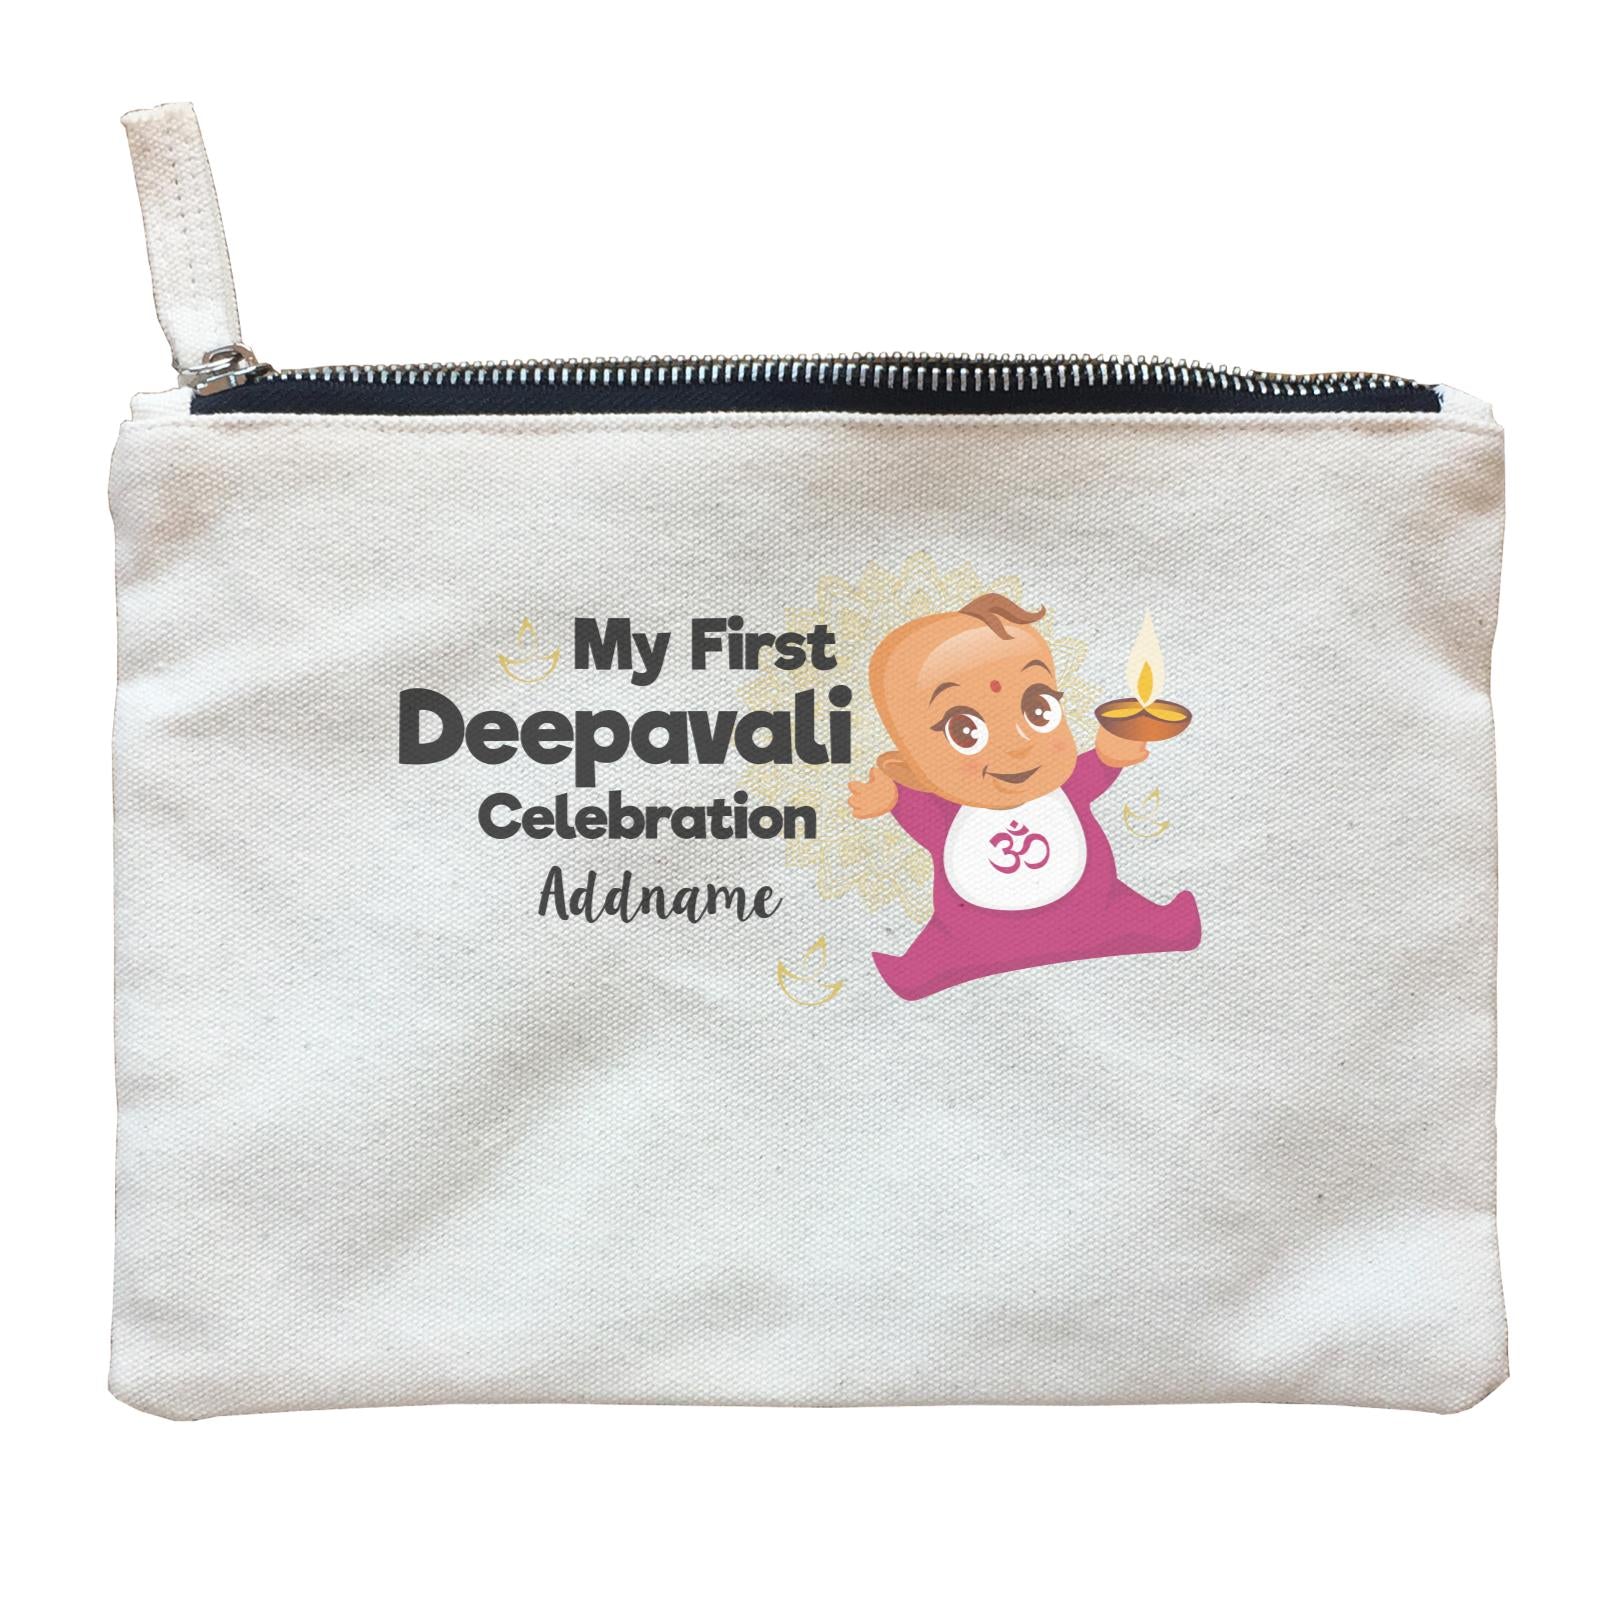 Cute Baby My First Deepavali Celebration Addname Zipper Pouch